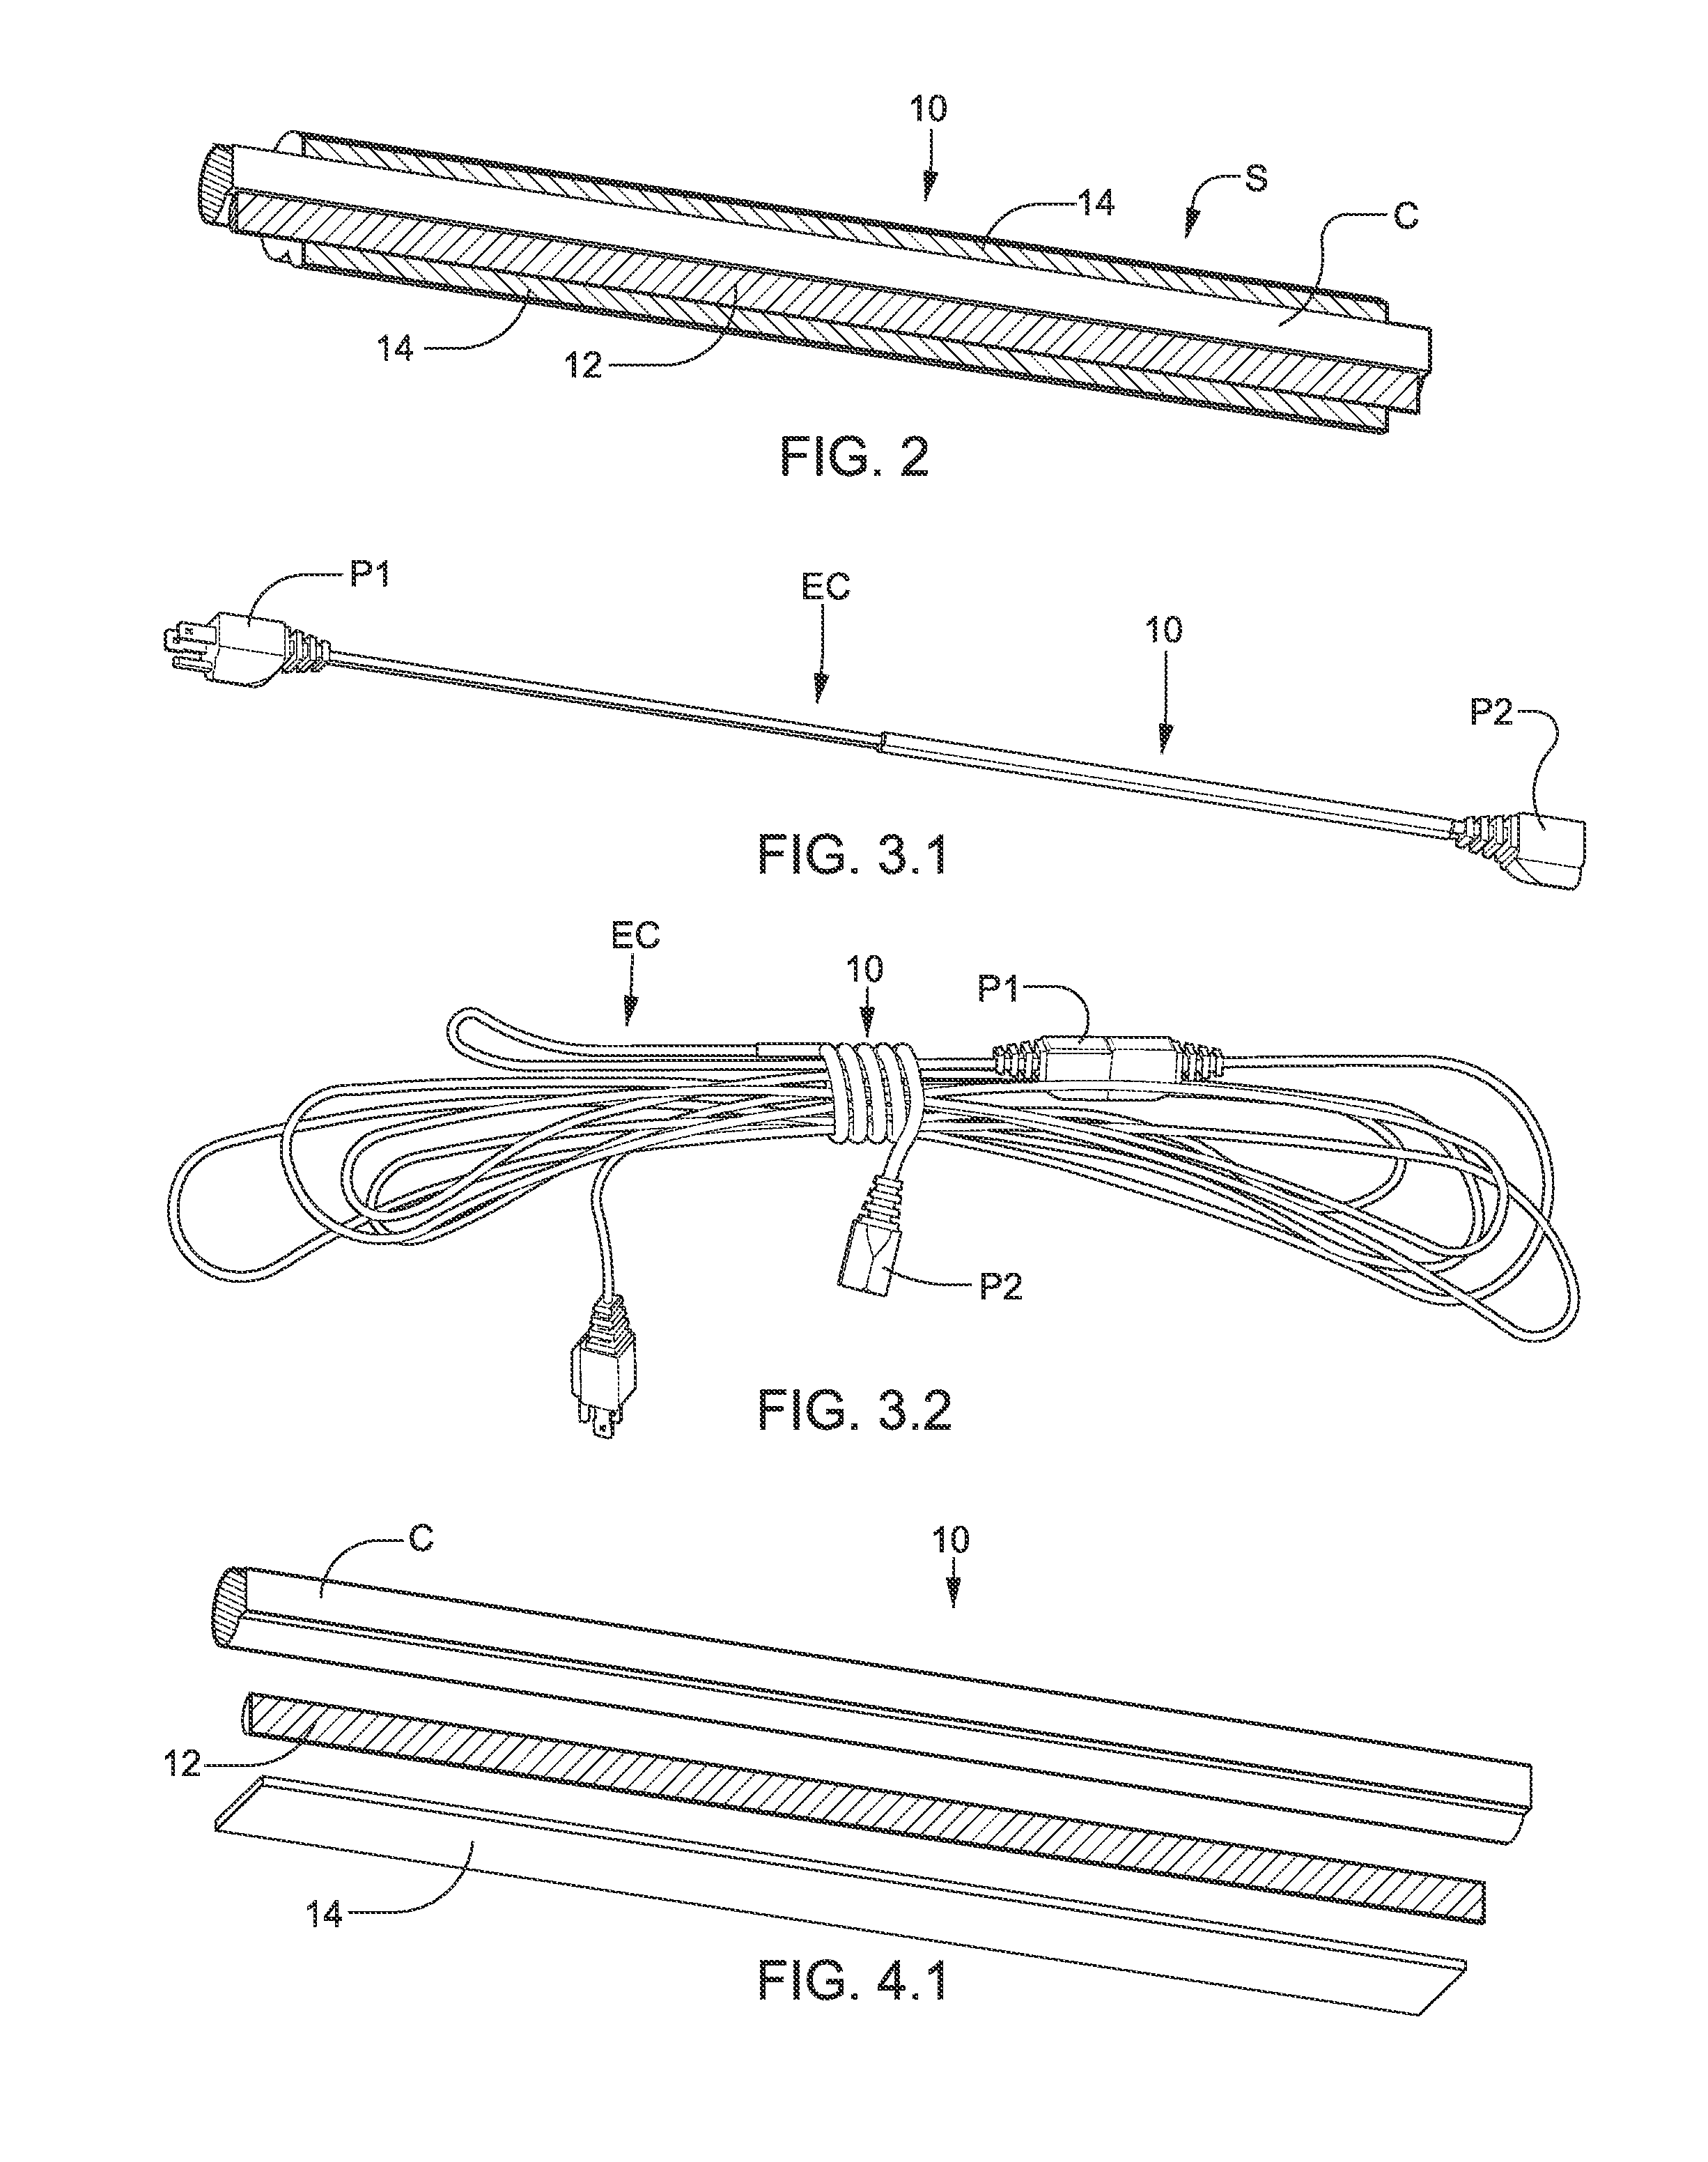 Cable management system and method of use